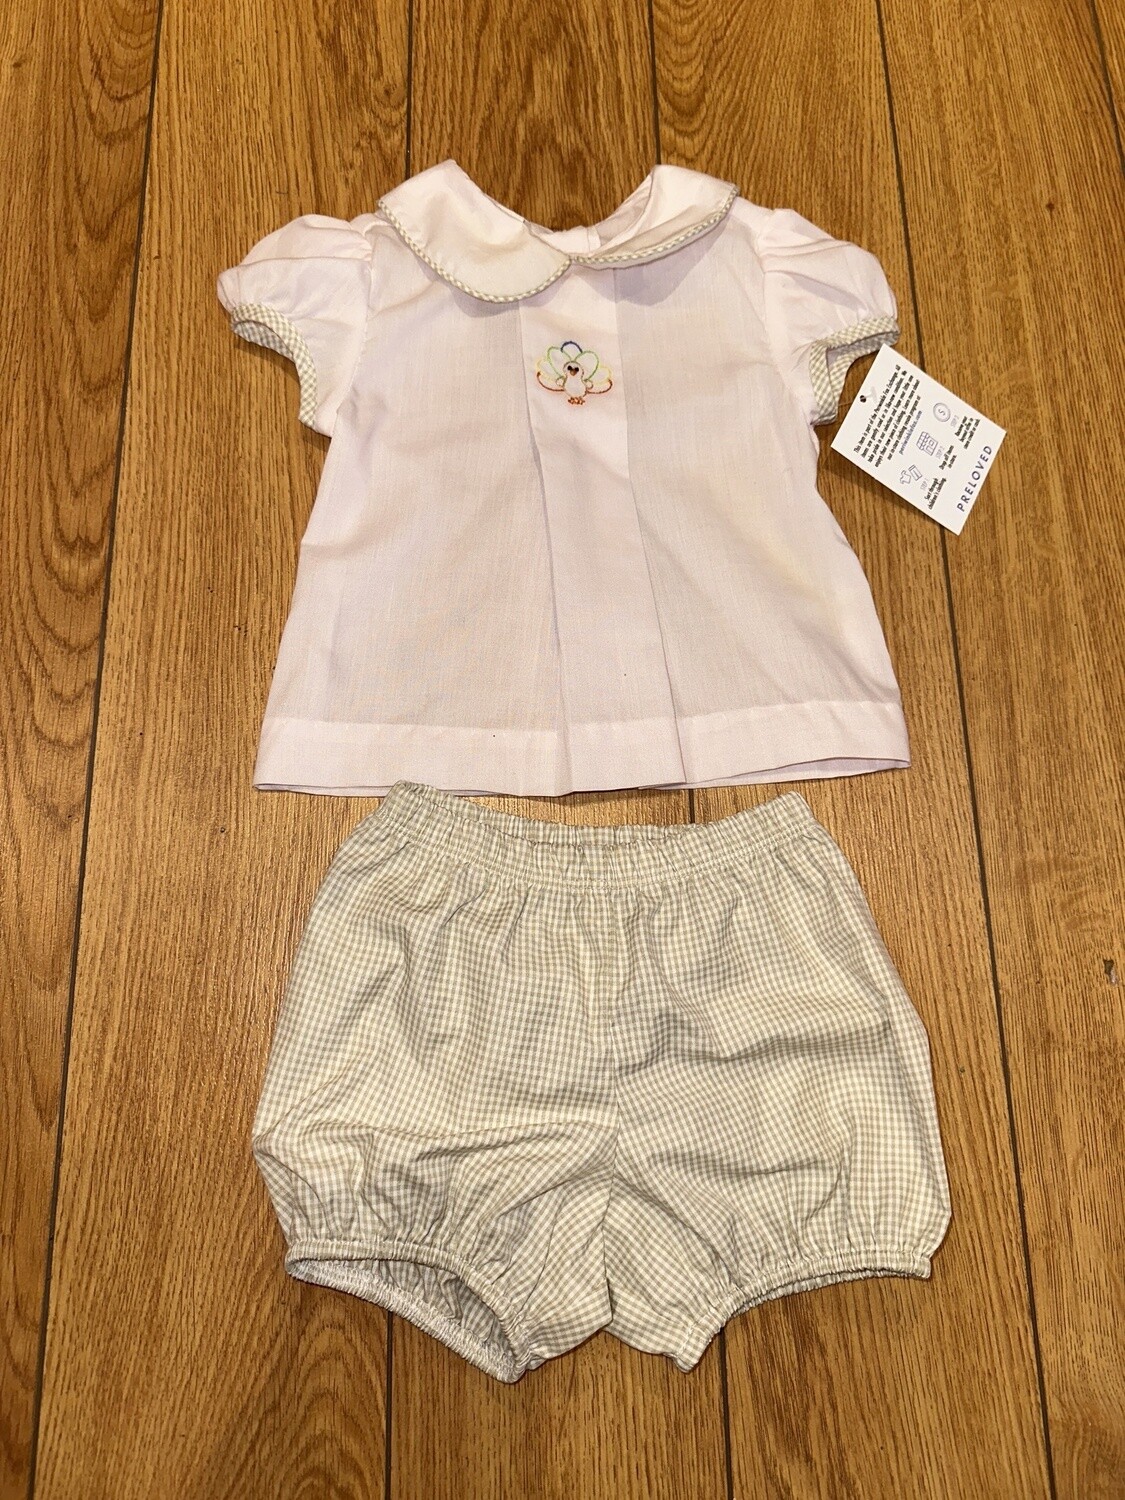 Used - Baby Blessings - Short Sleeve - 9 Months - PWE602